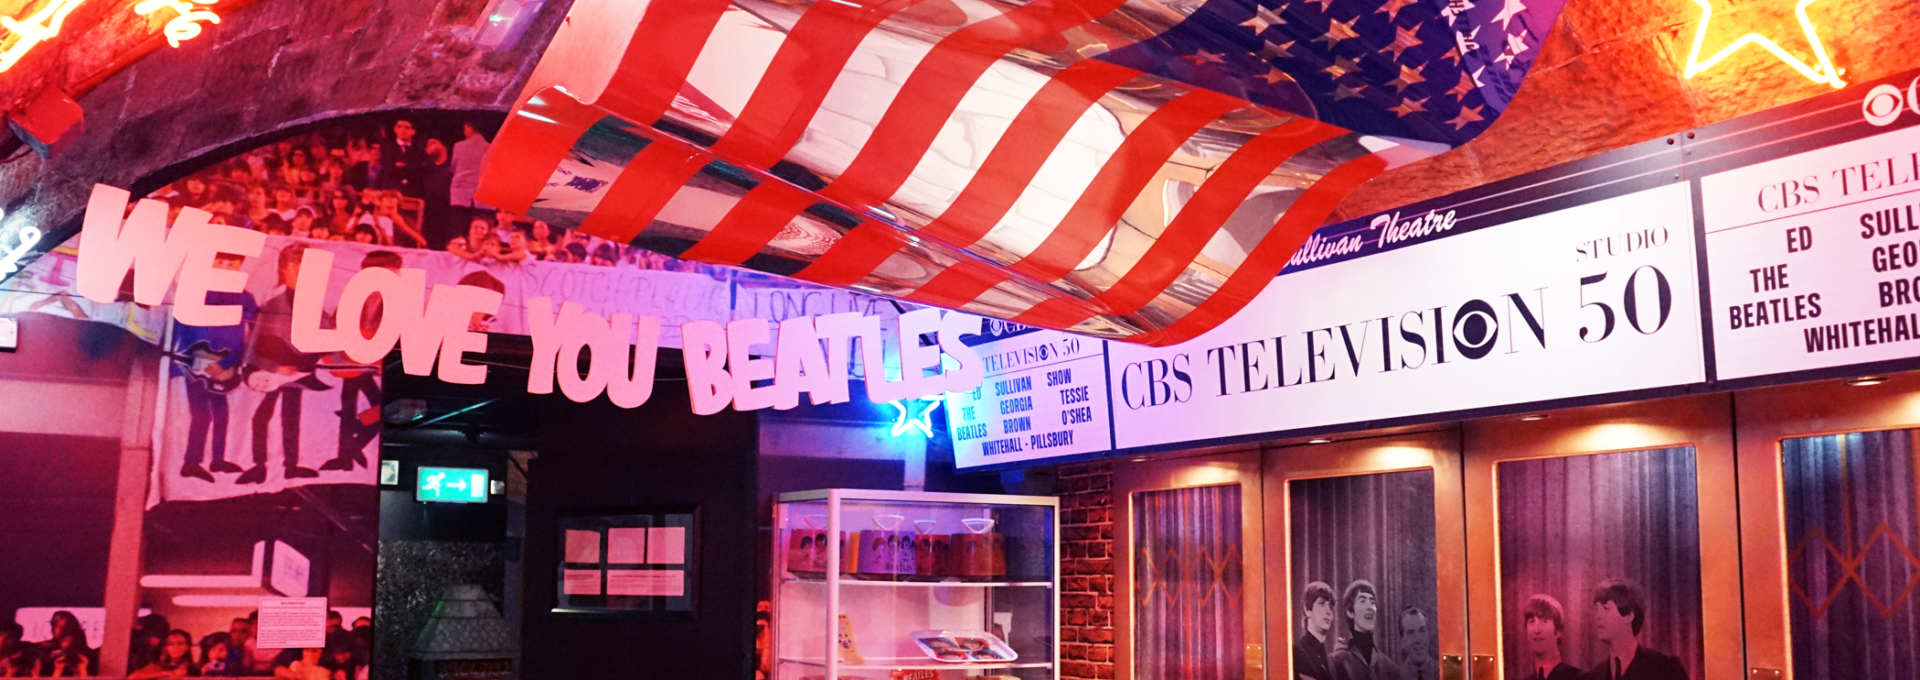 The USA room at The Beatles Story Museum, Liverpool